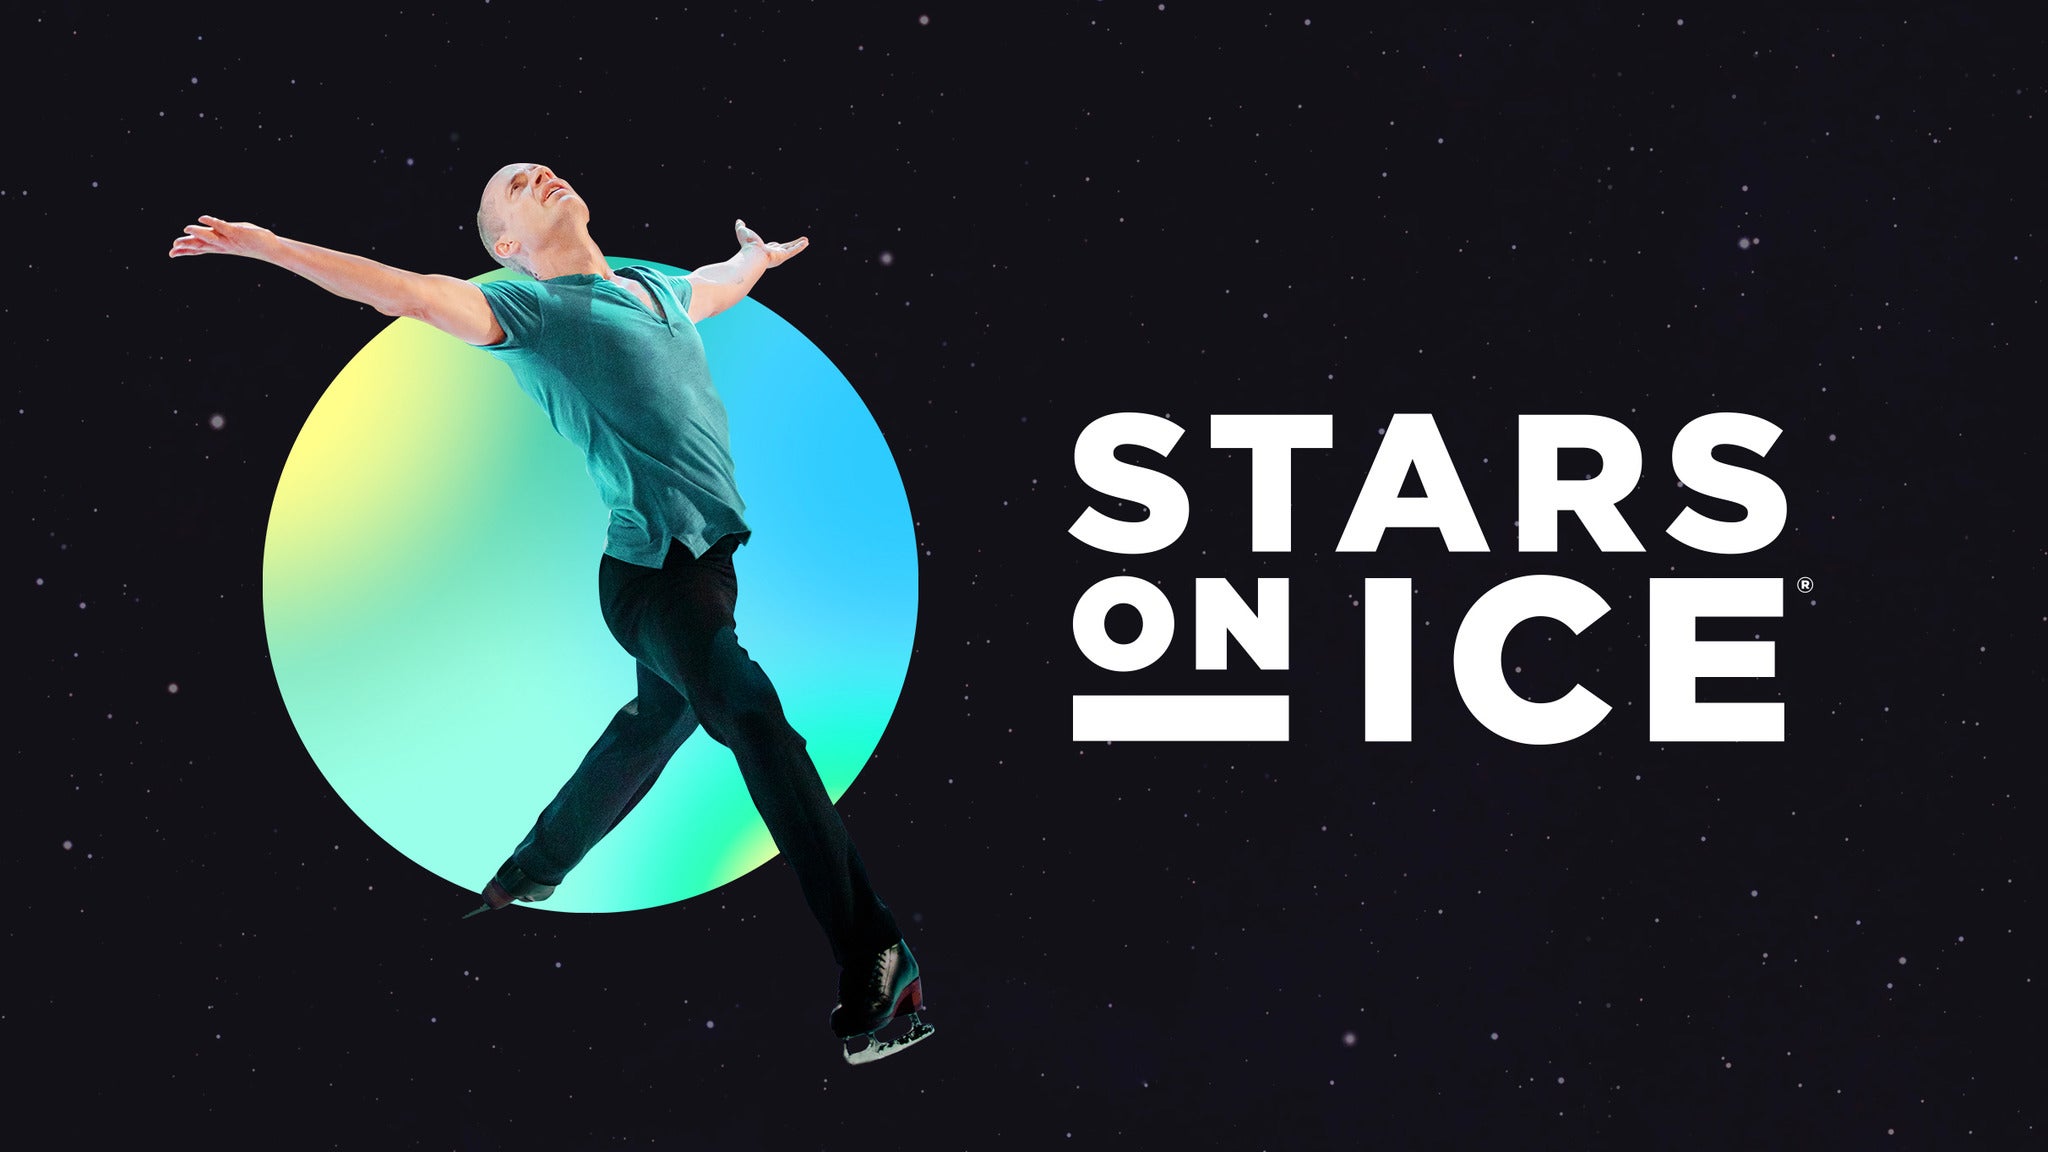 Image used with permission from Ticketmaster | Stars on Ice - Canada tickets